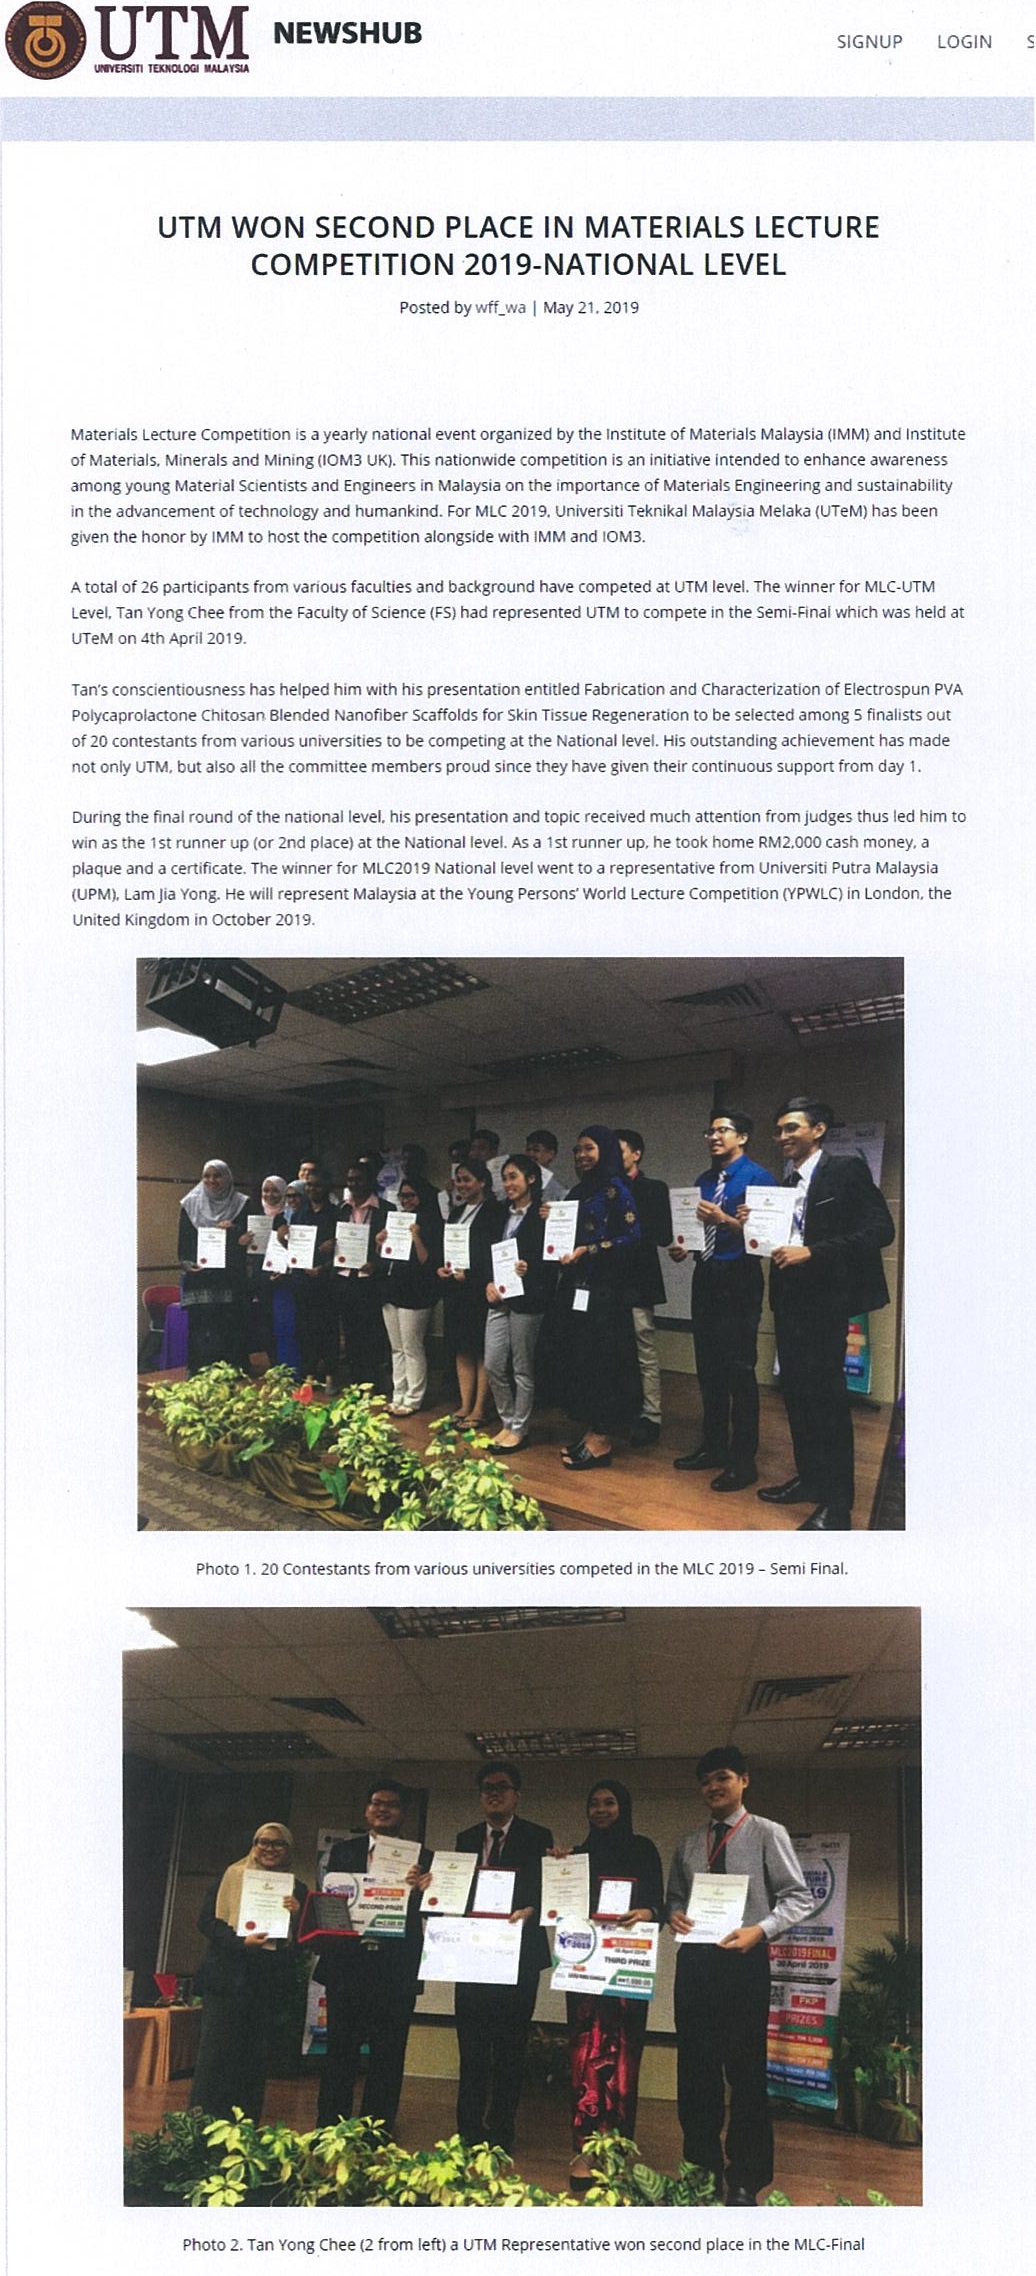 UTM won second place in materials lecture competition 2019-national level